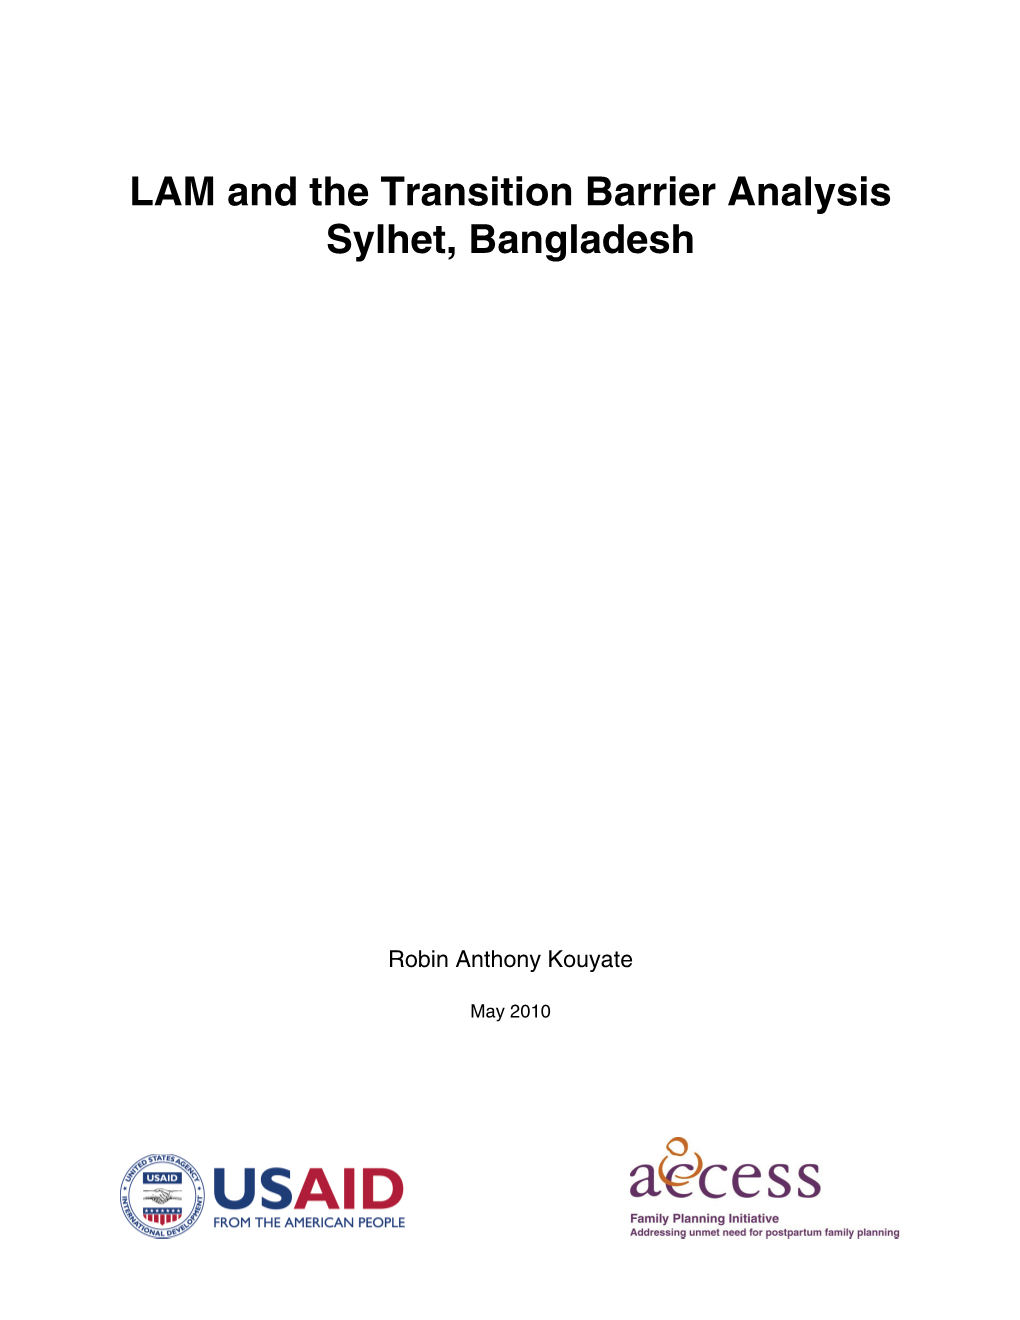 LAM and the Transition Barrier Analysis Sylhet, Bangladesh